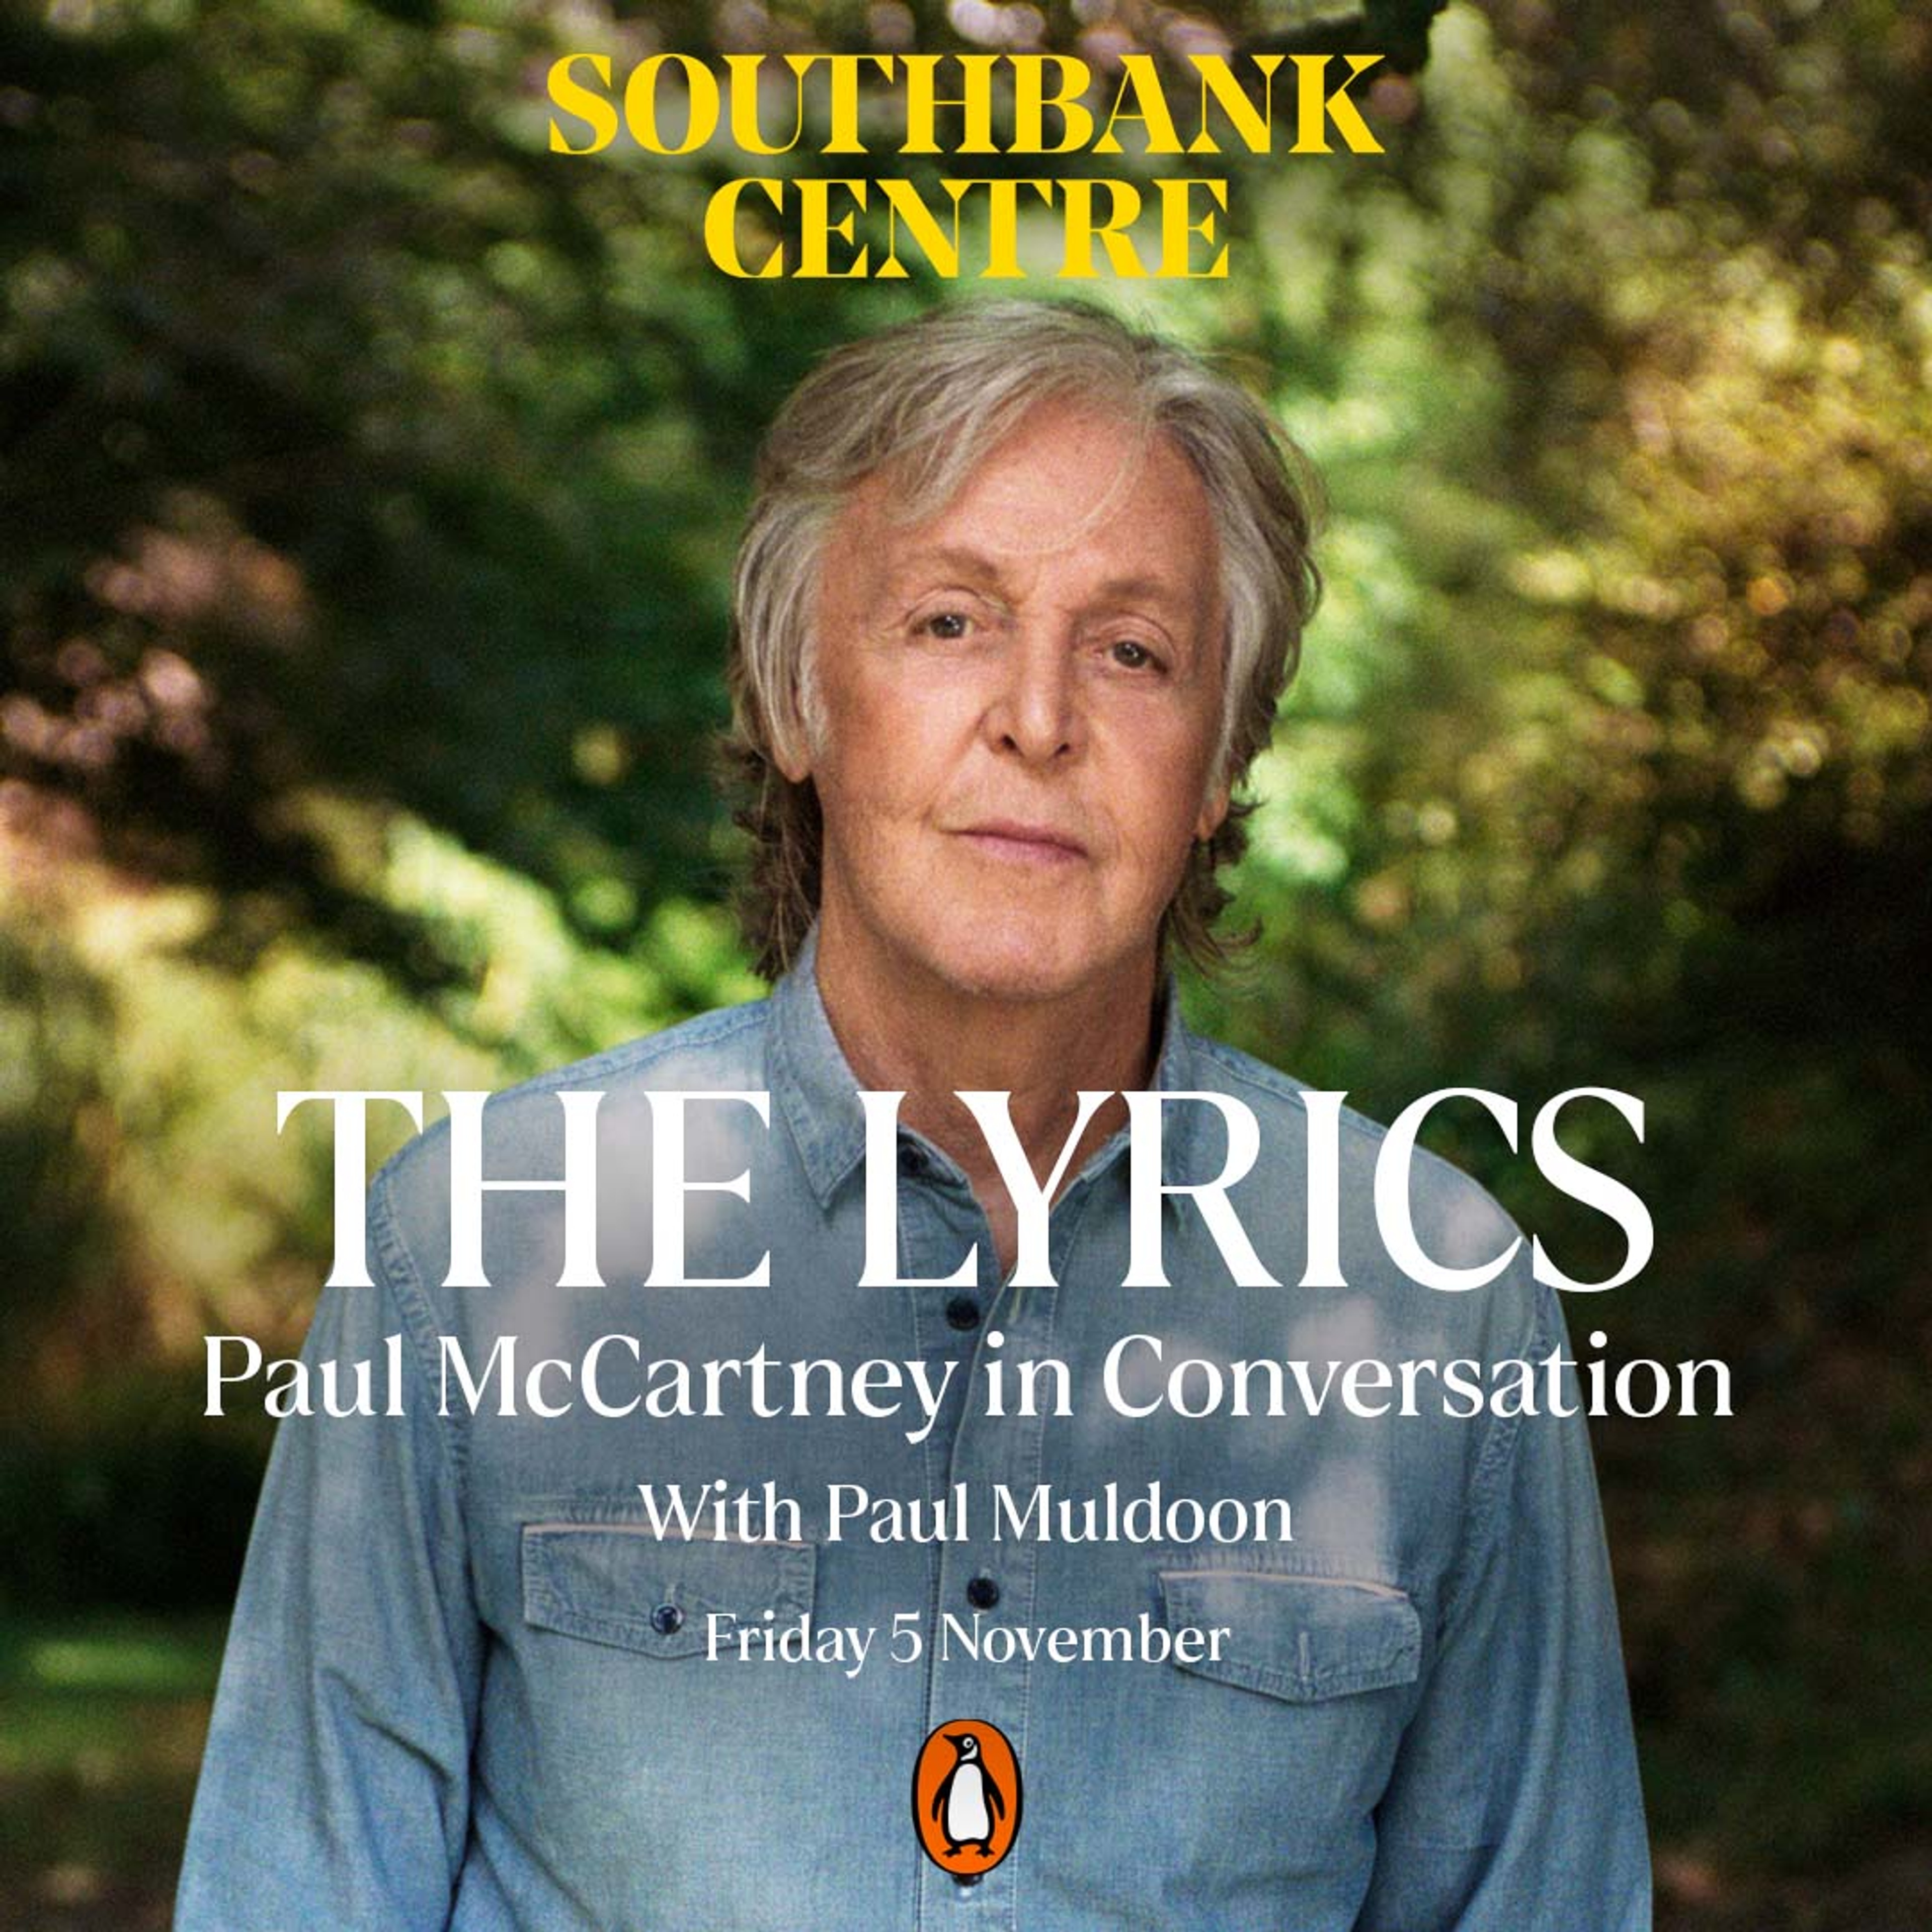 Image of Paul used to promote 'The Lyrics: Paul McCartney in Conversation' at The Southbank Centre 